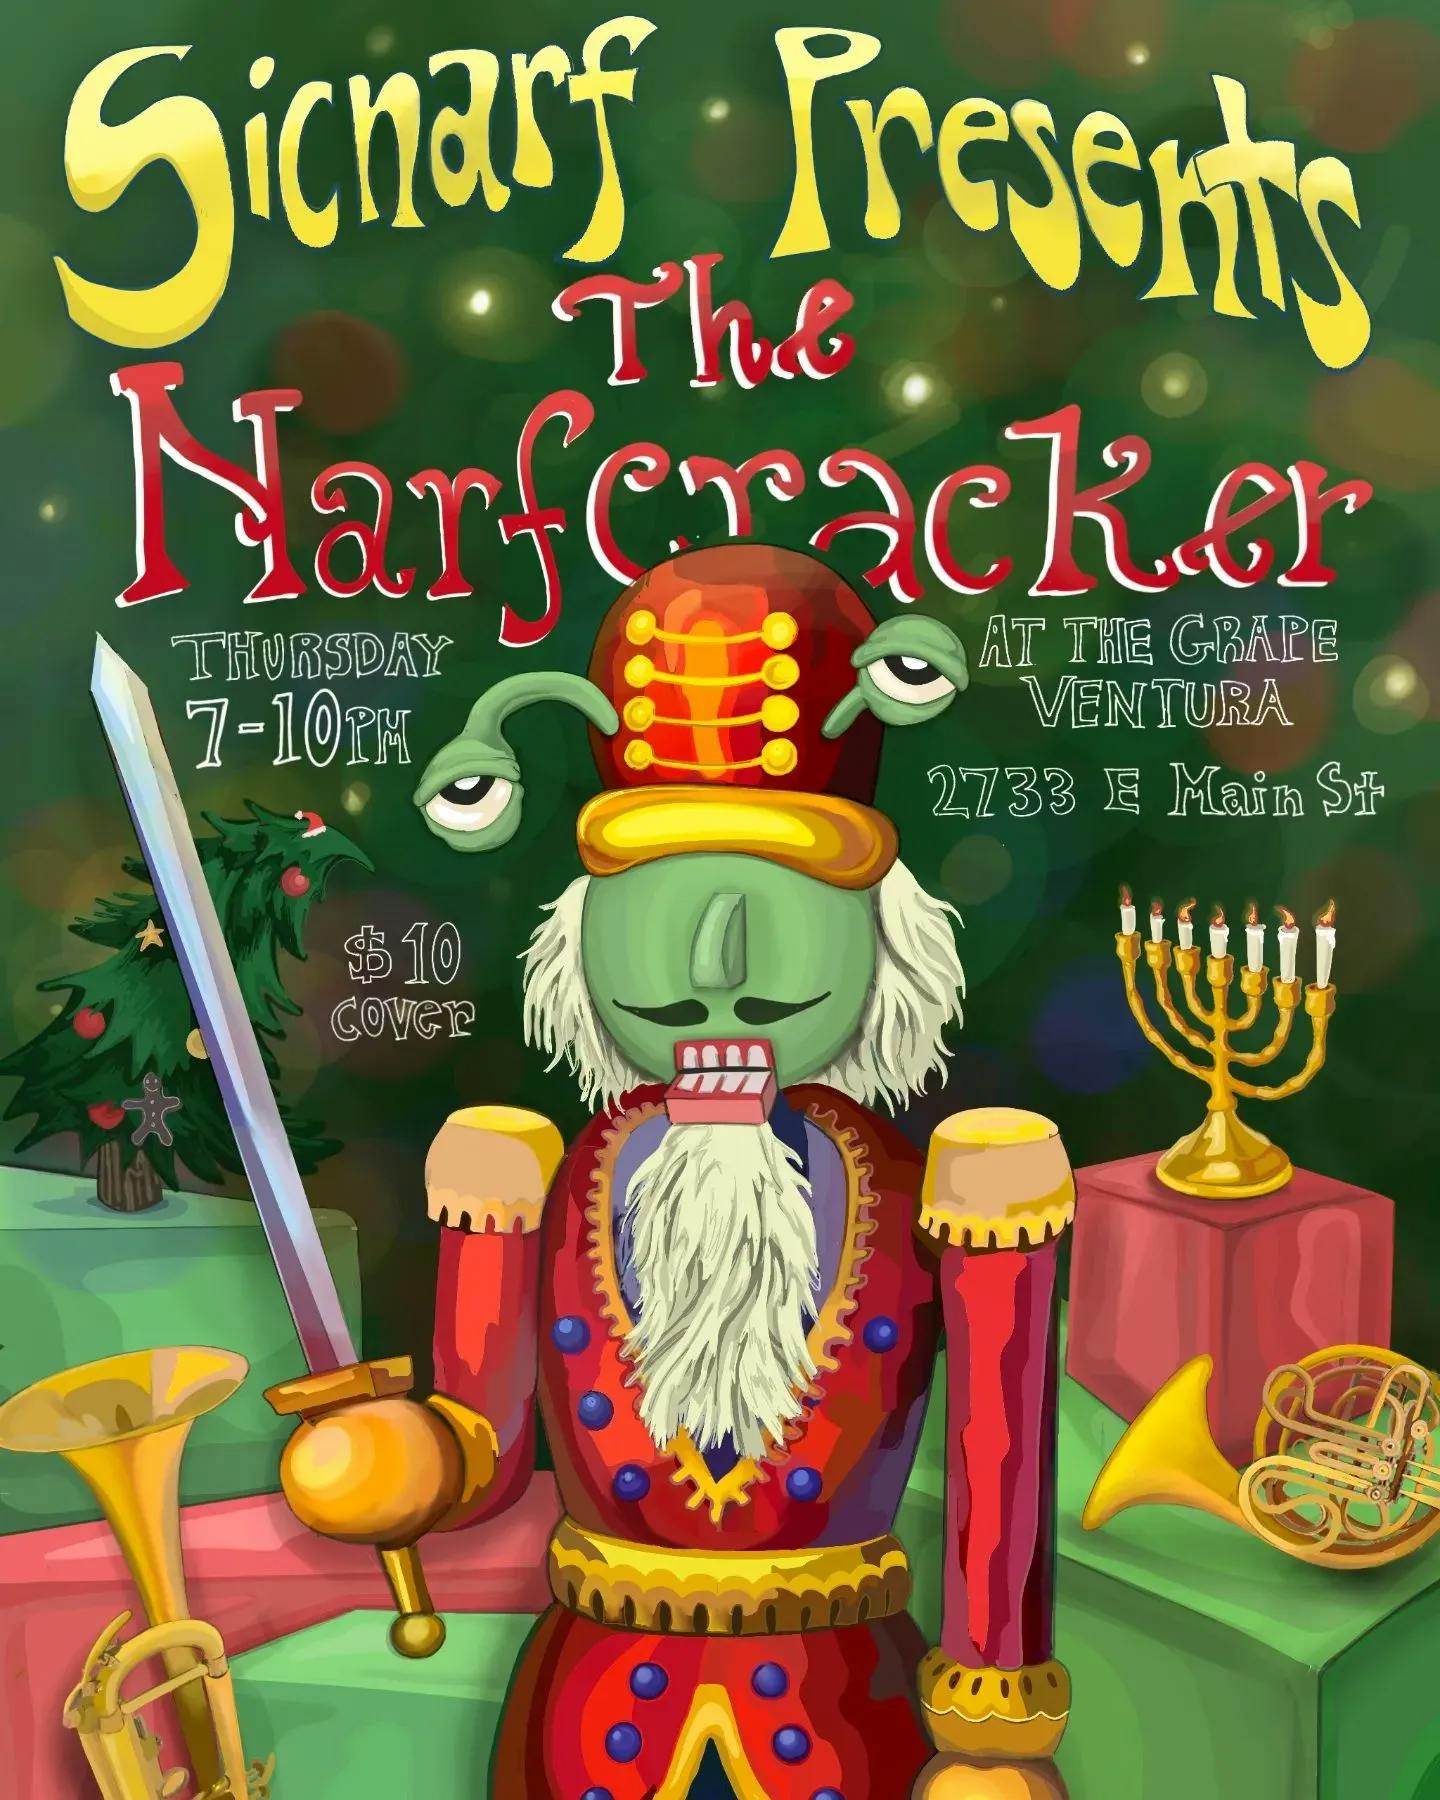 Poster for the Narf Cracker